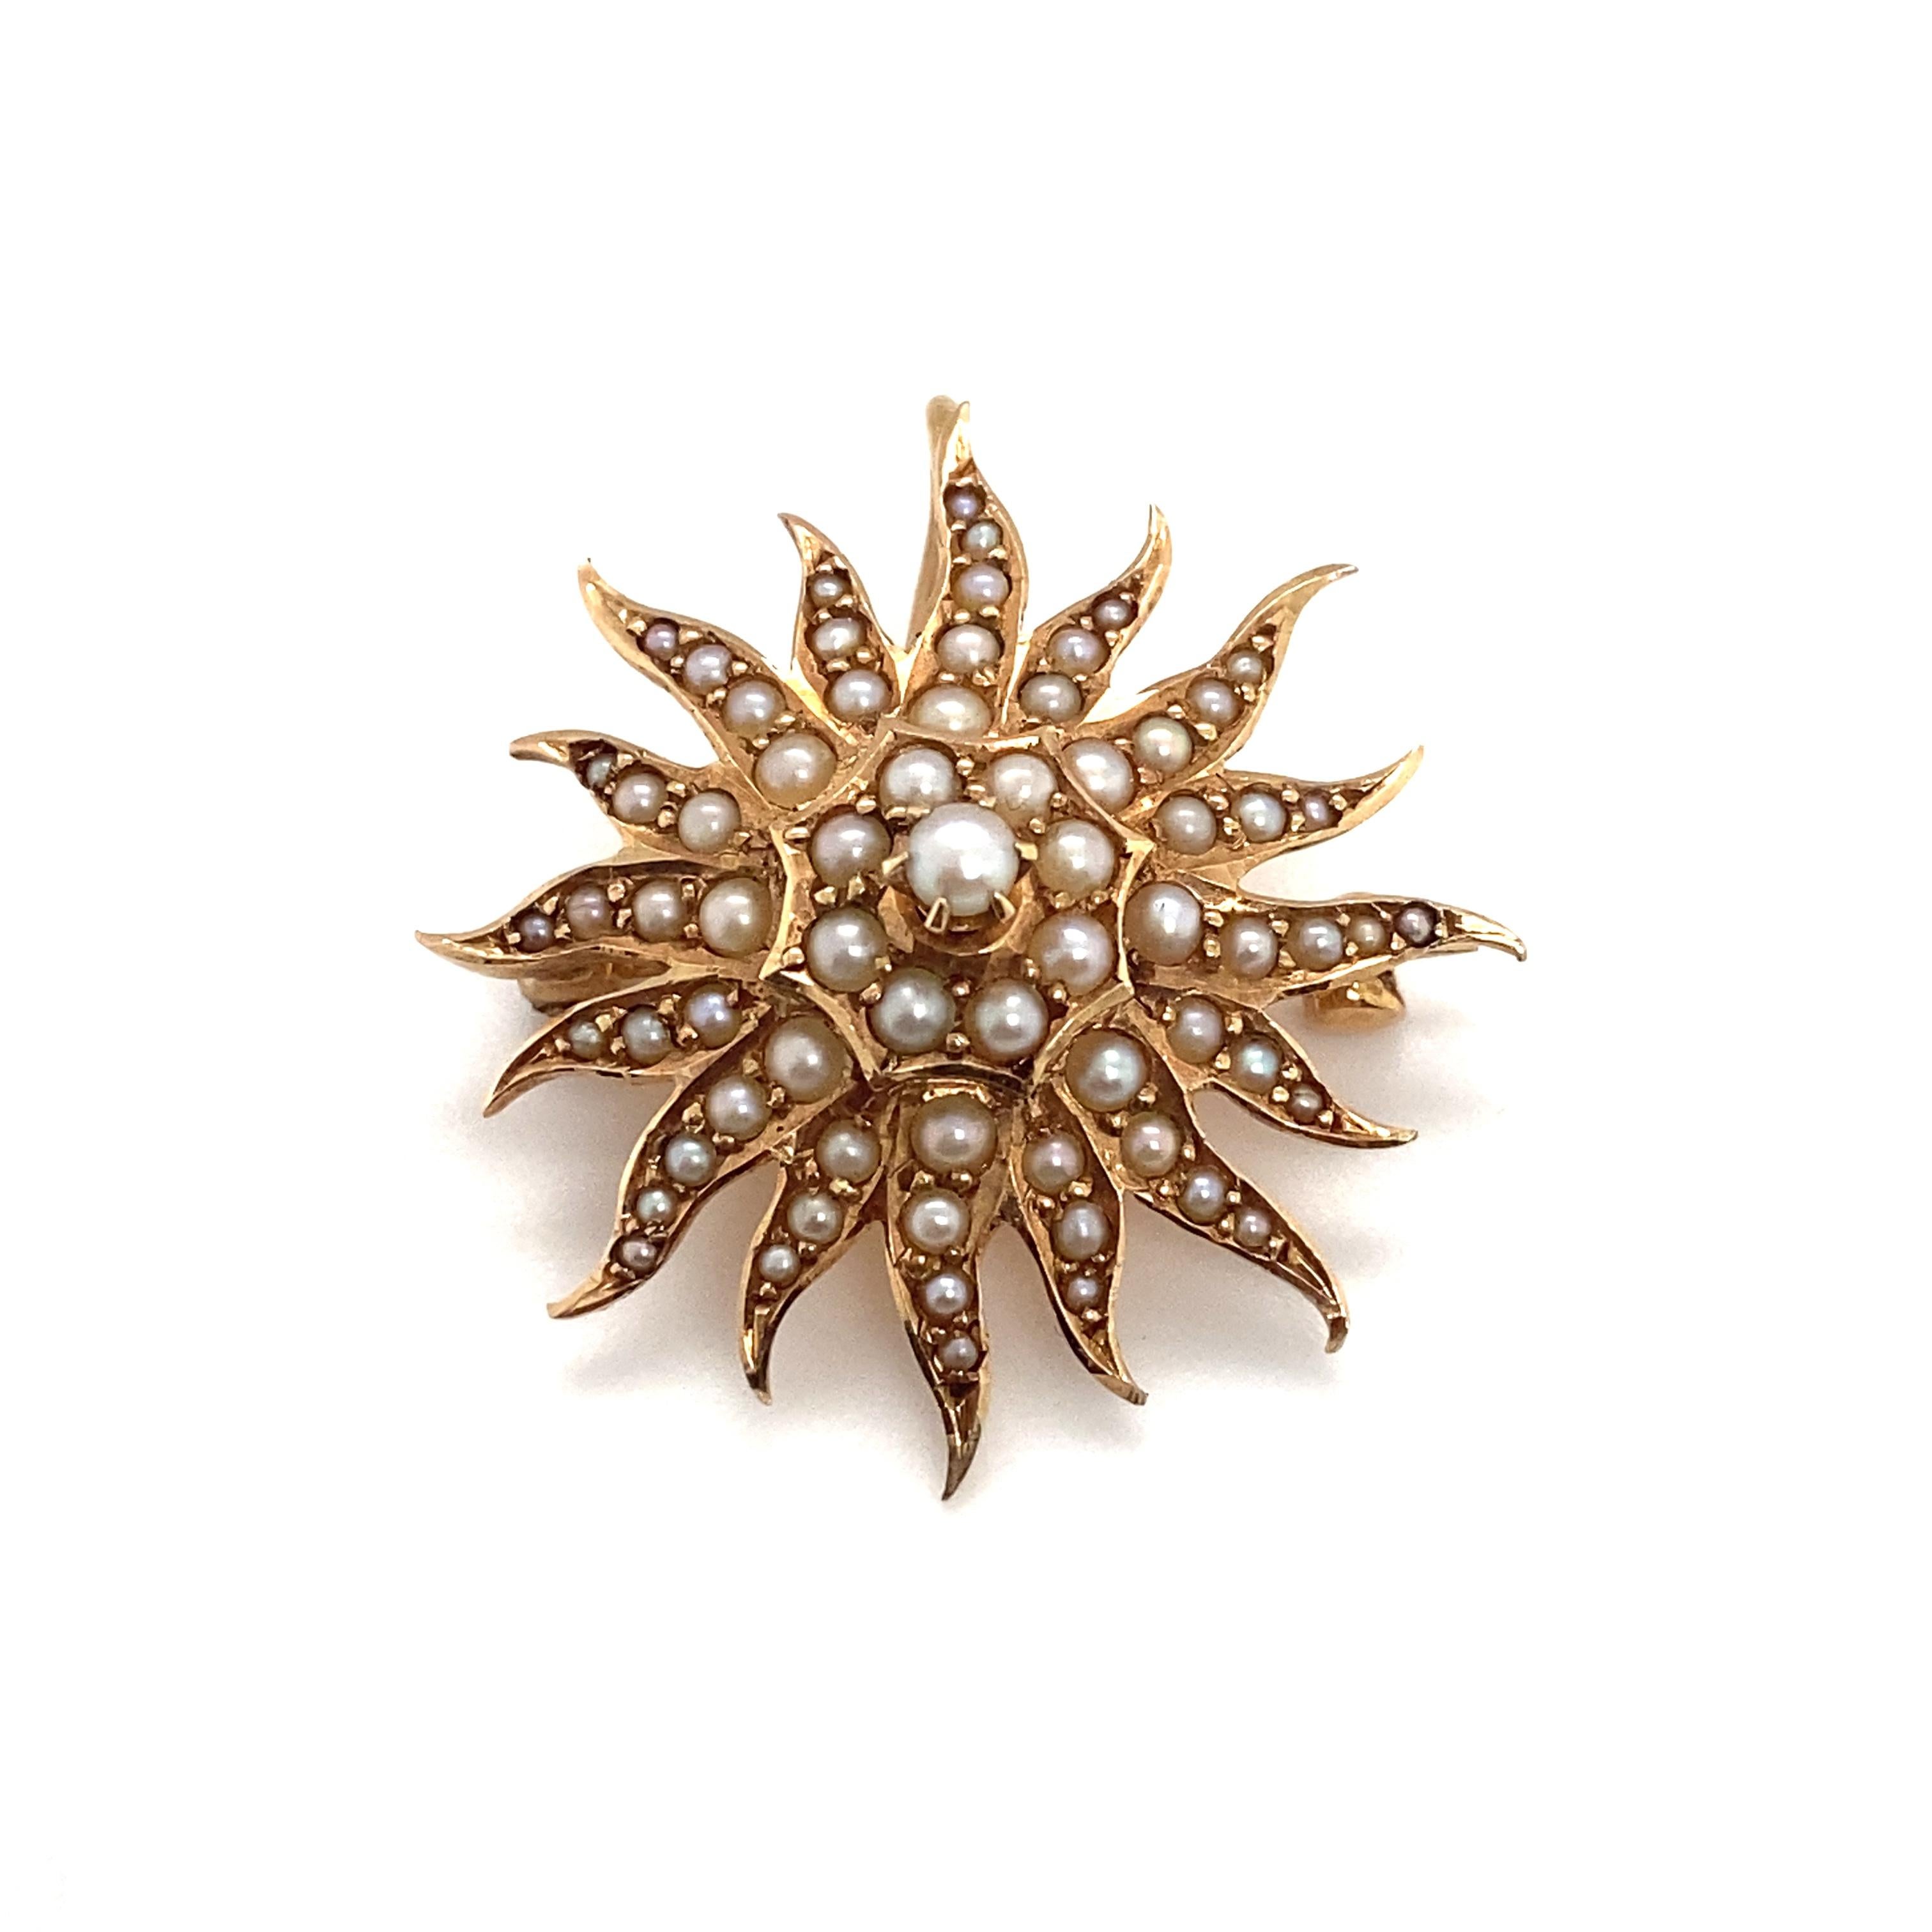 Item Details: A sunburst pin with seed pearls by Birks of London, Canada. Can also be worn as a pendant.

Circa: 1890s
Metal Type: 15 Karat Yellow Gold
Weight: 6.1 grams
Size: 1 inch diameter
 